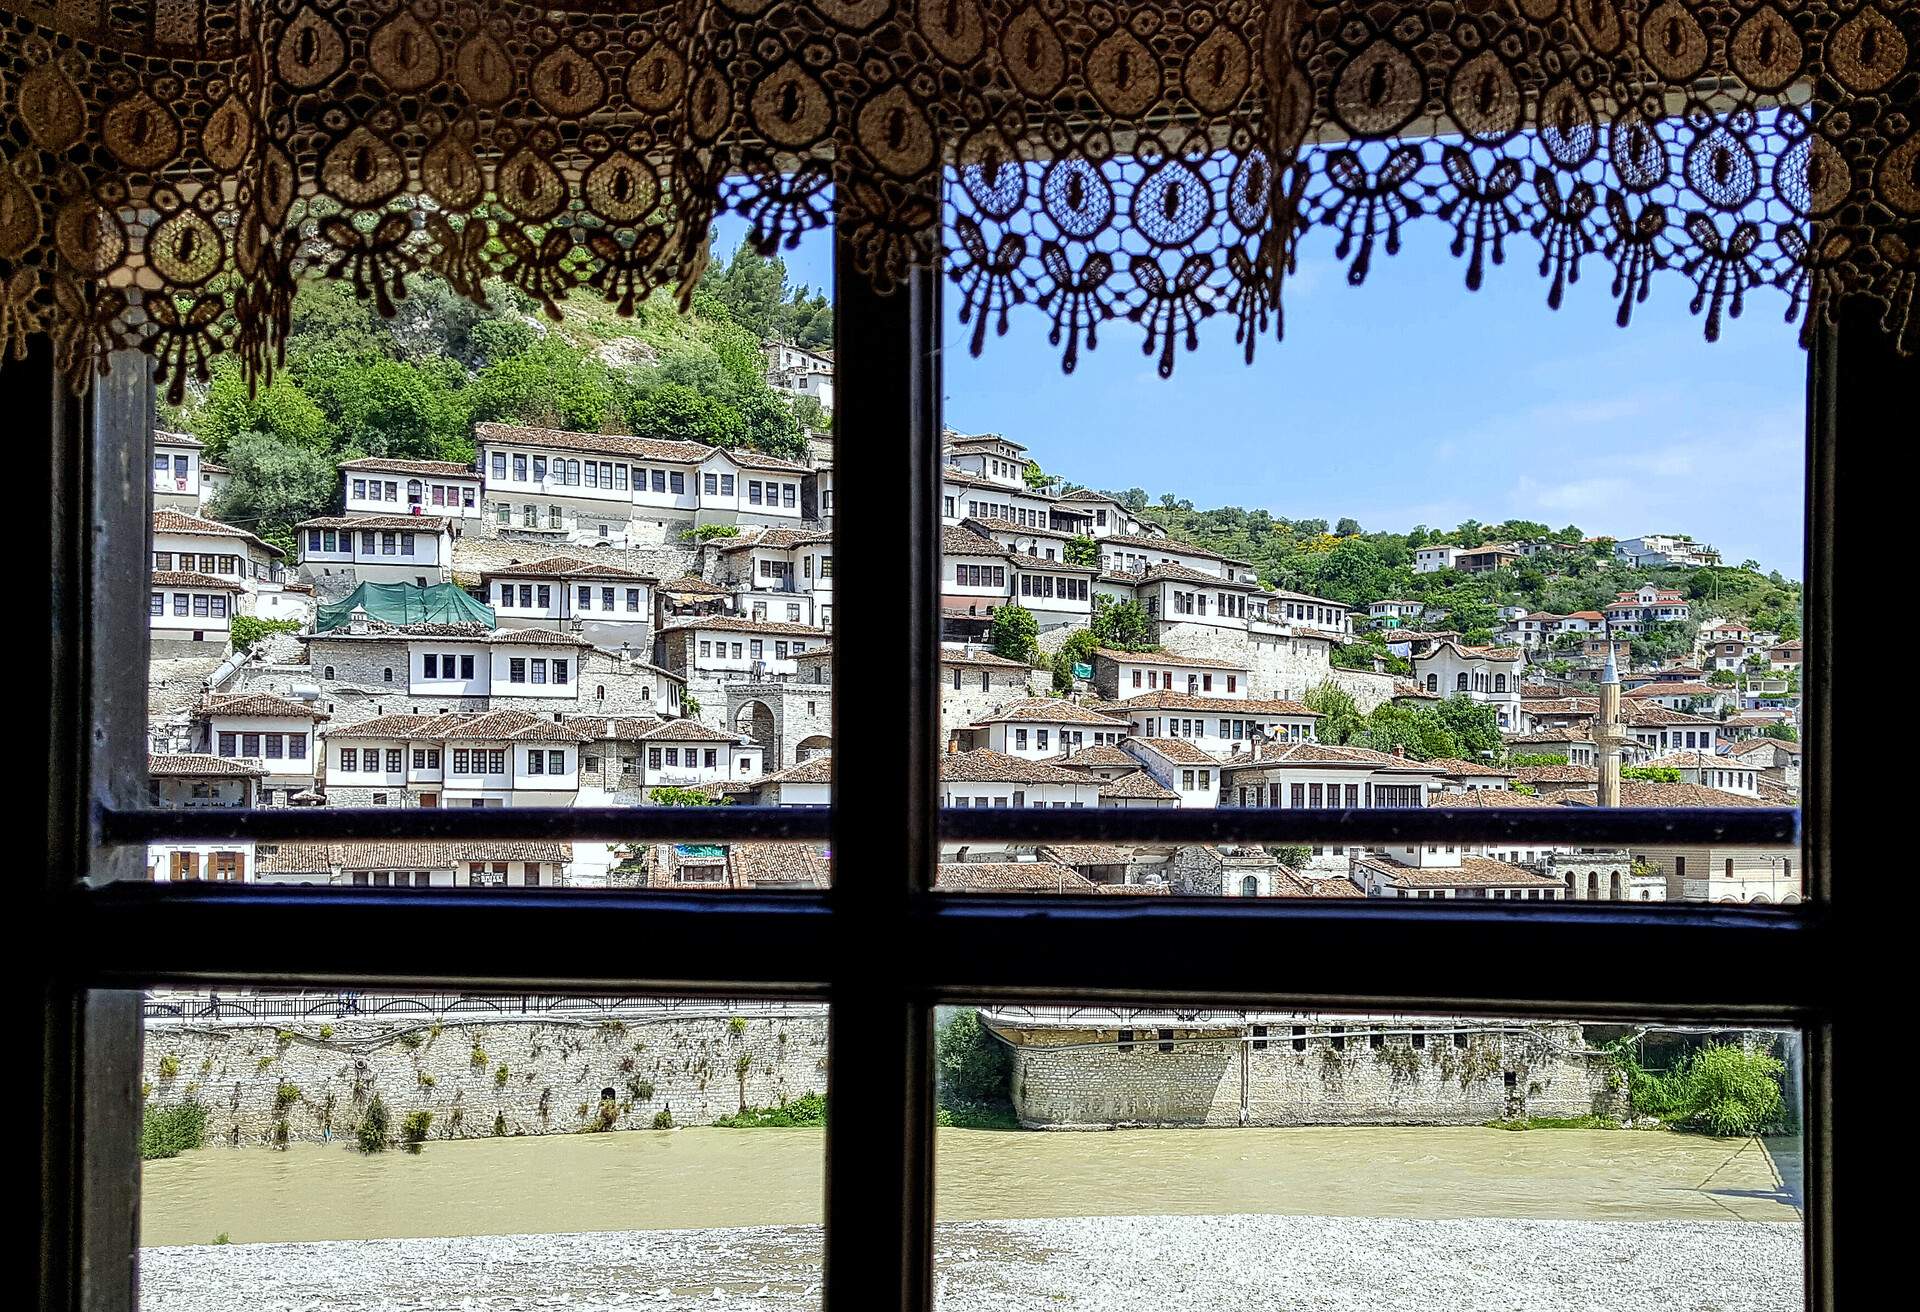 Ottoman houses of Berat, across the Osum River. View on Mangalem district, taken from a house at the other side of the river, from Gorica. In 2008, the old town of Berat was added to the Unesco world heritage list.